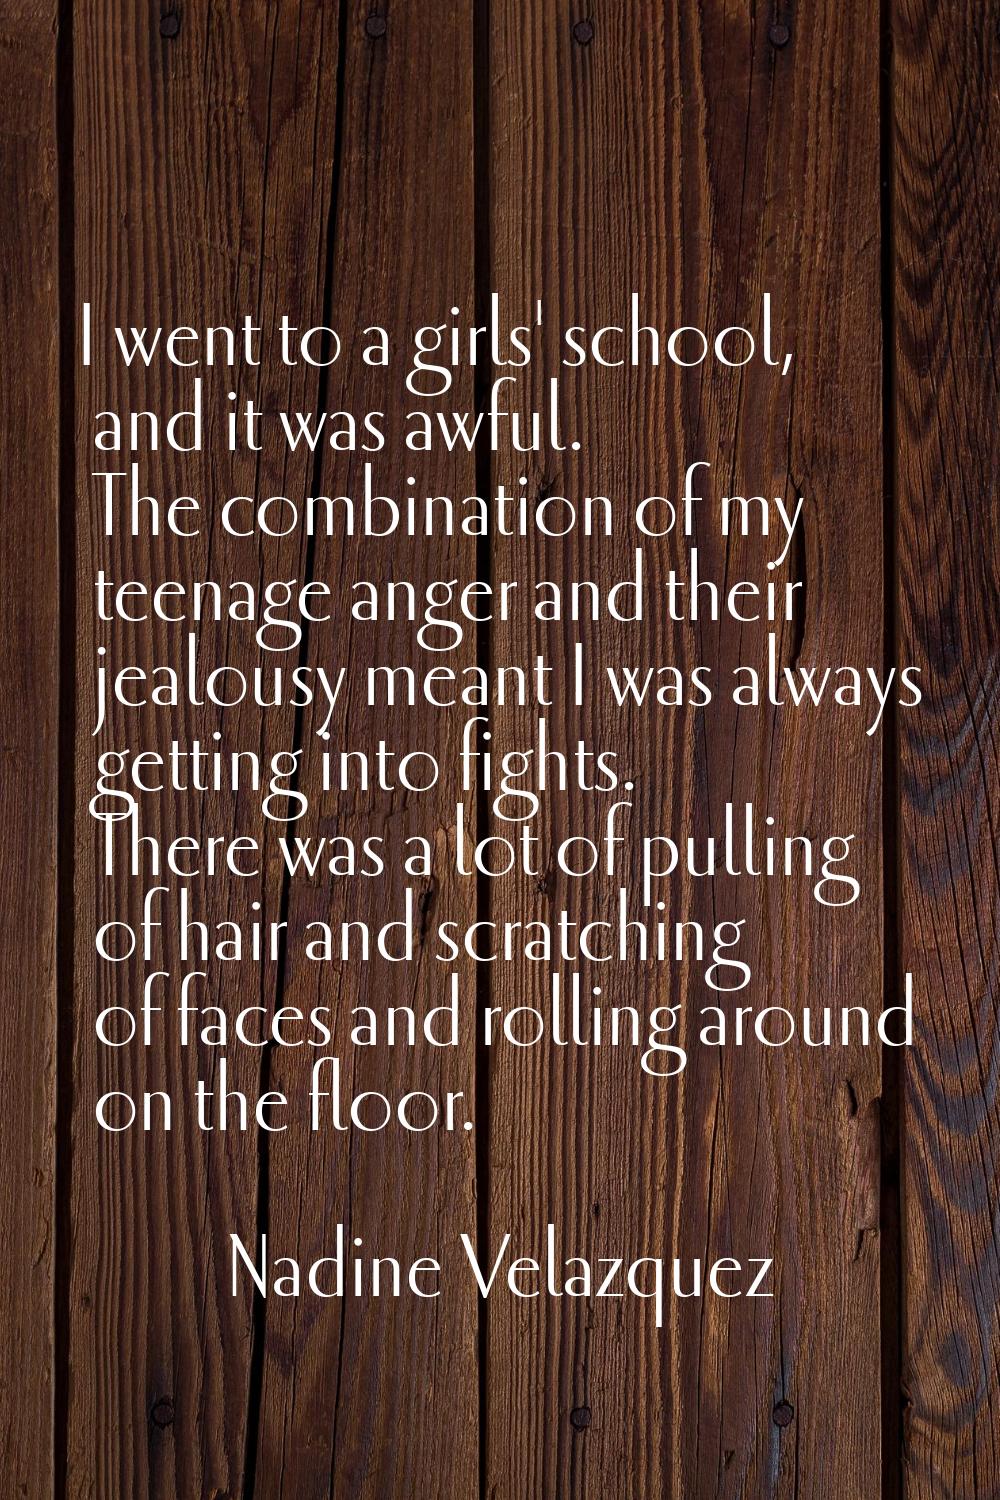 I went to a girls' school, and it was awful. The combination of my teenage anger and their jealousy